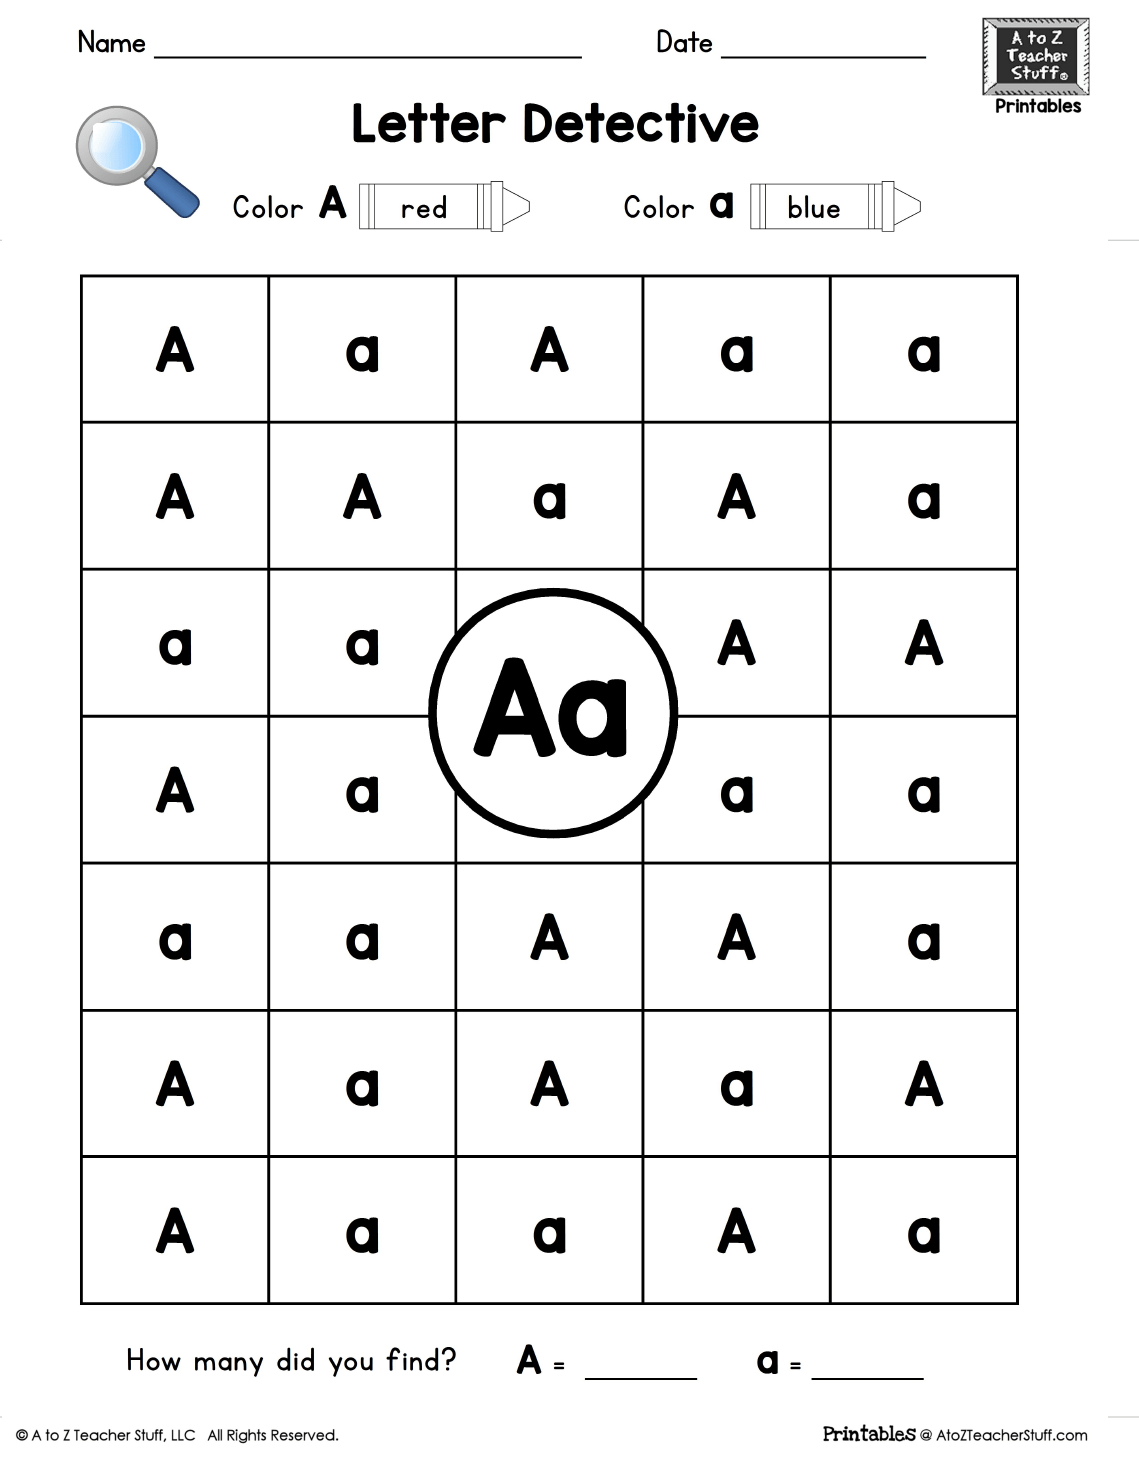 Letter A Letter Detective Uppercase   Lowercase Visual